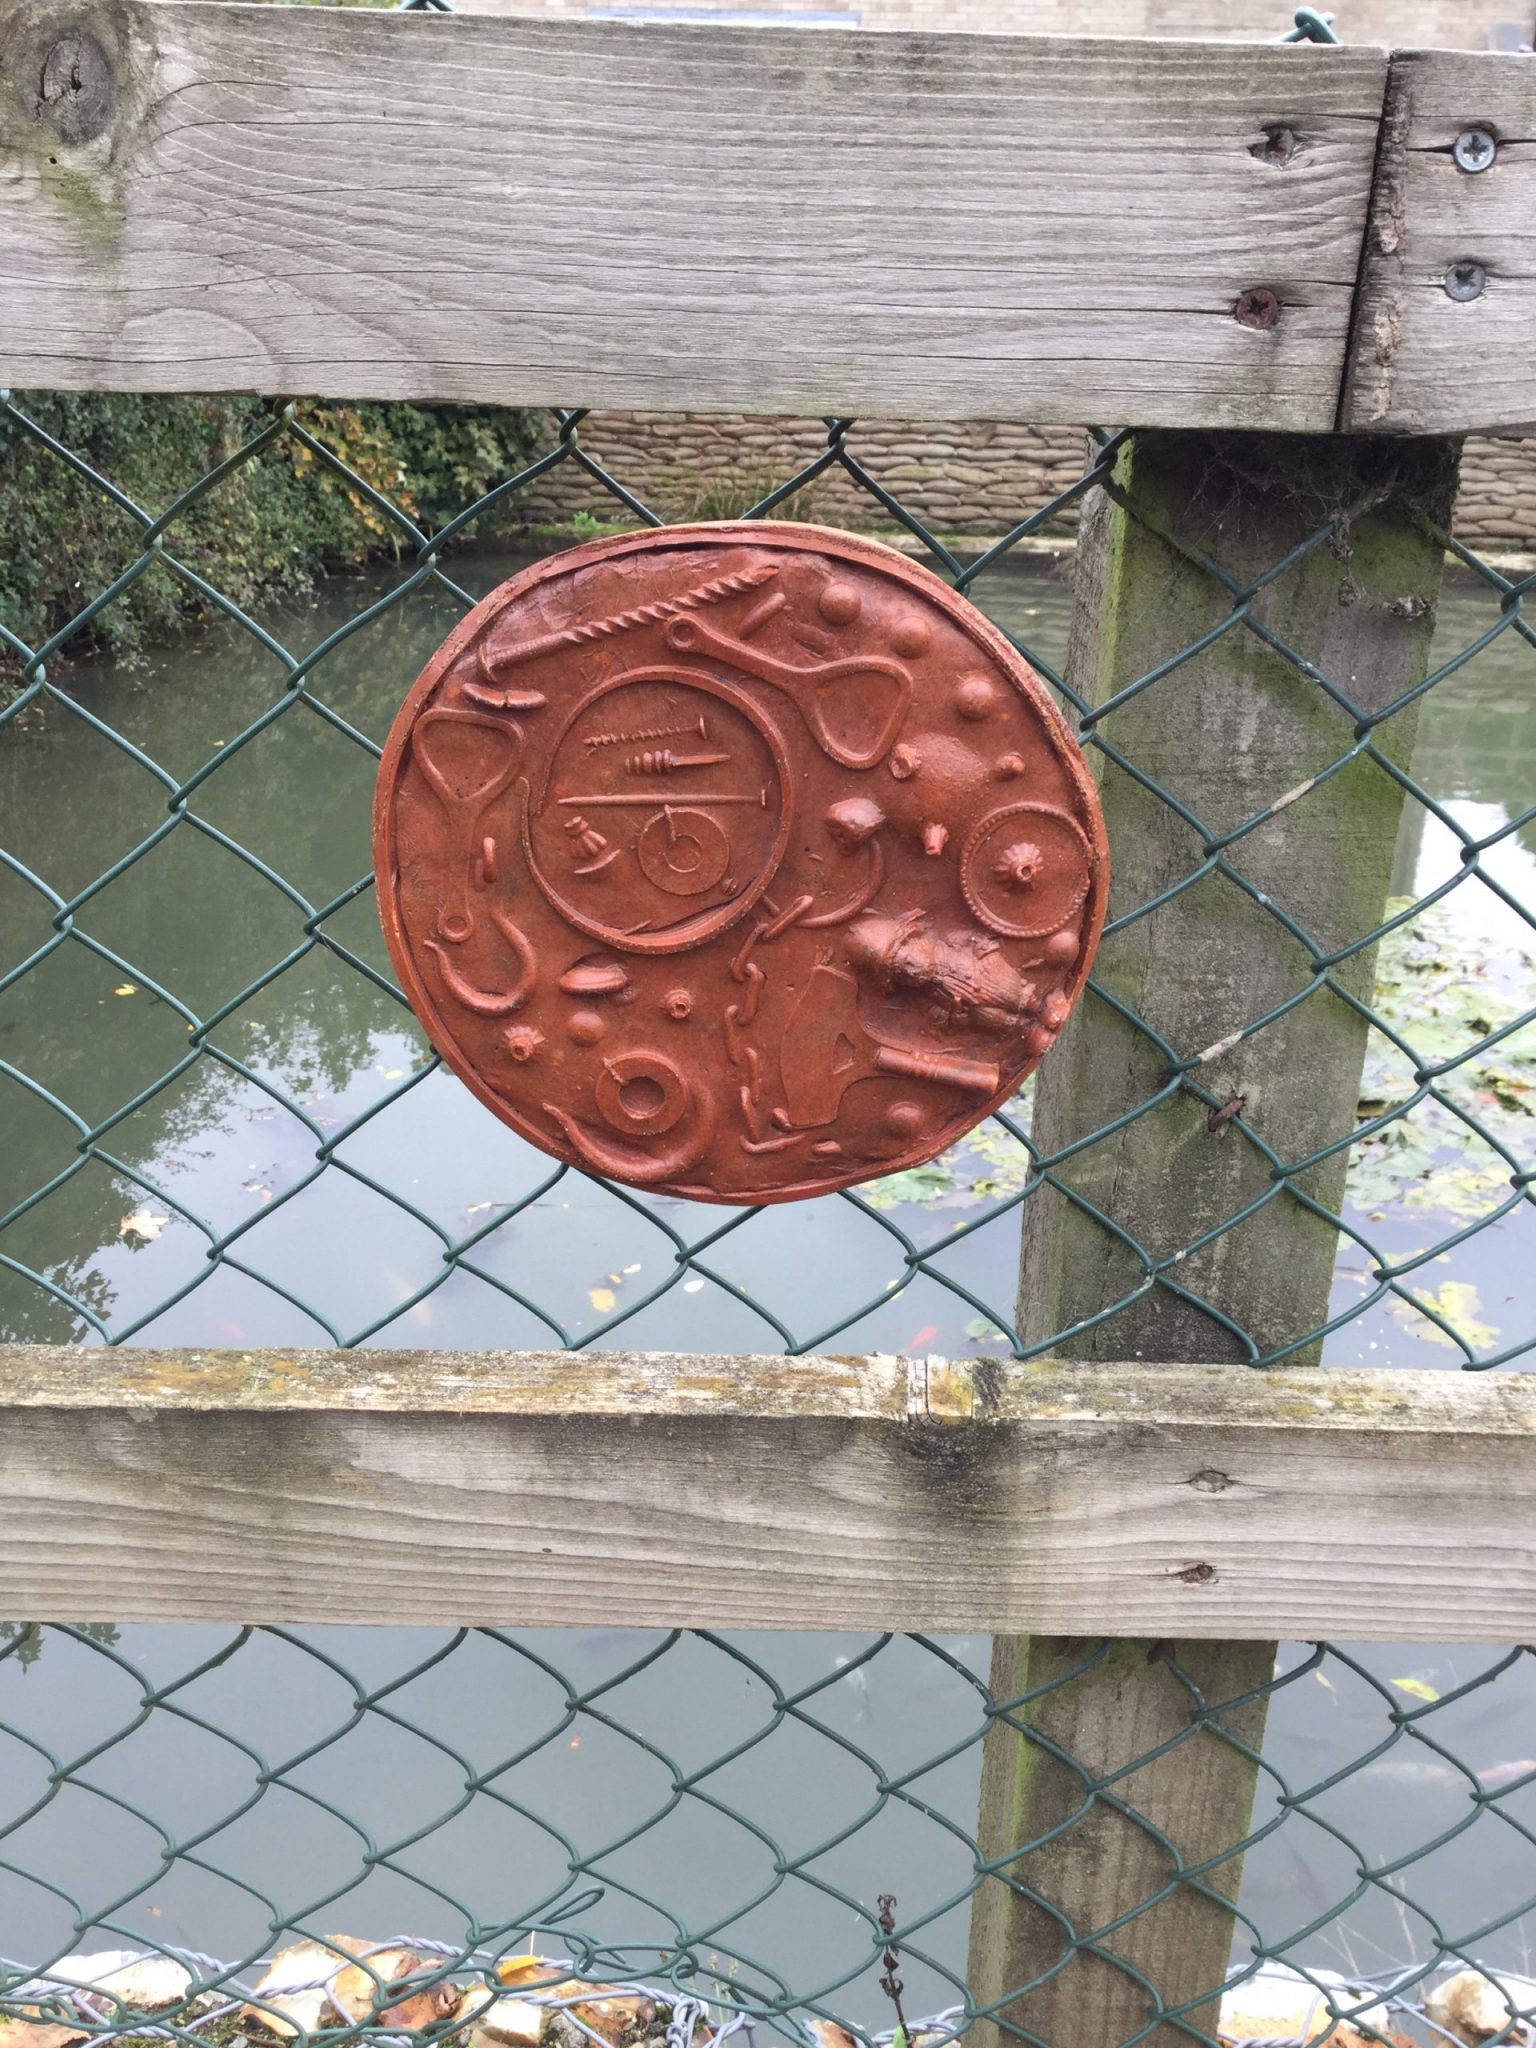 A circular plaque, with impression of objects including a bottle opener, hooks and a small toy, attached to a chain link fence in front of the village pond